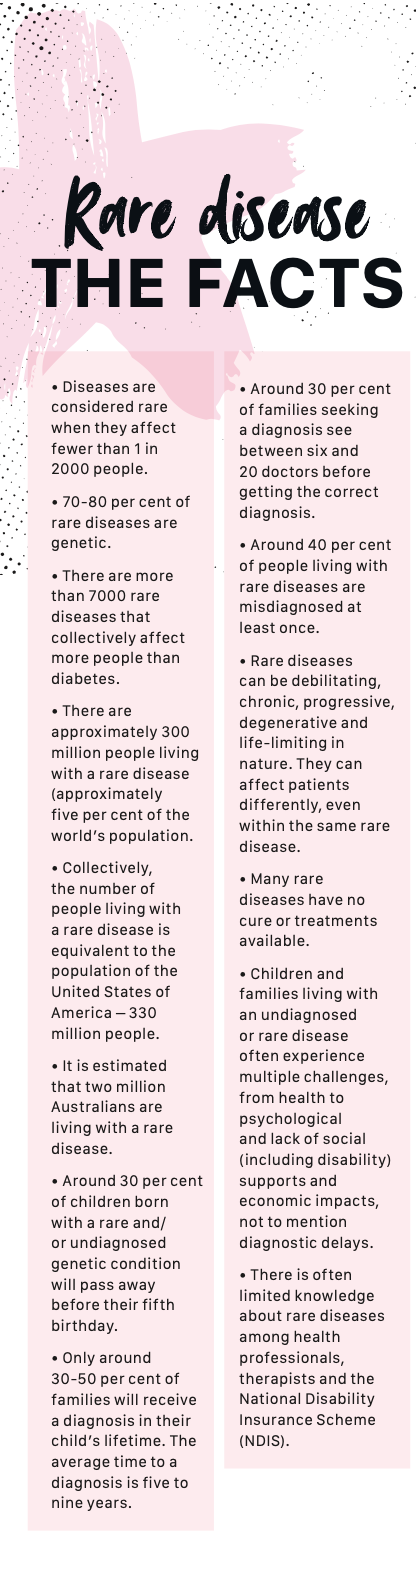 List of rare disease facts.